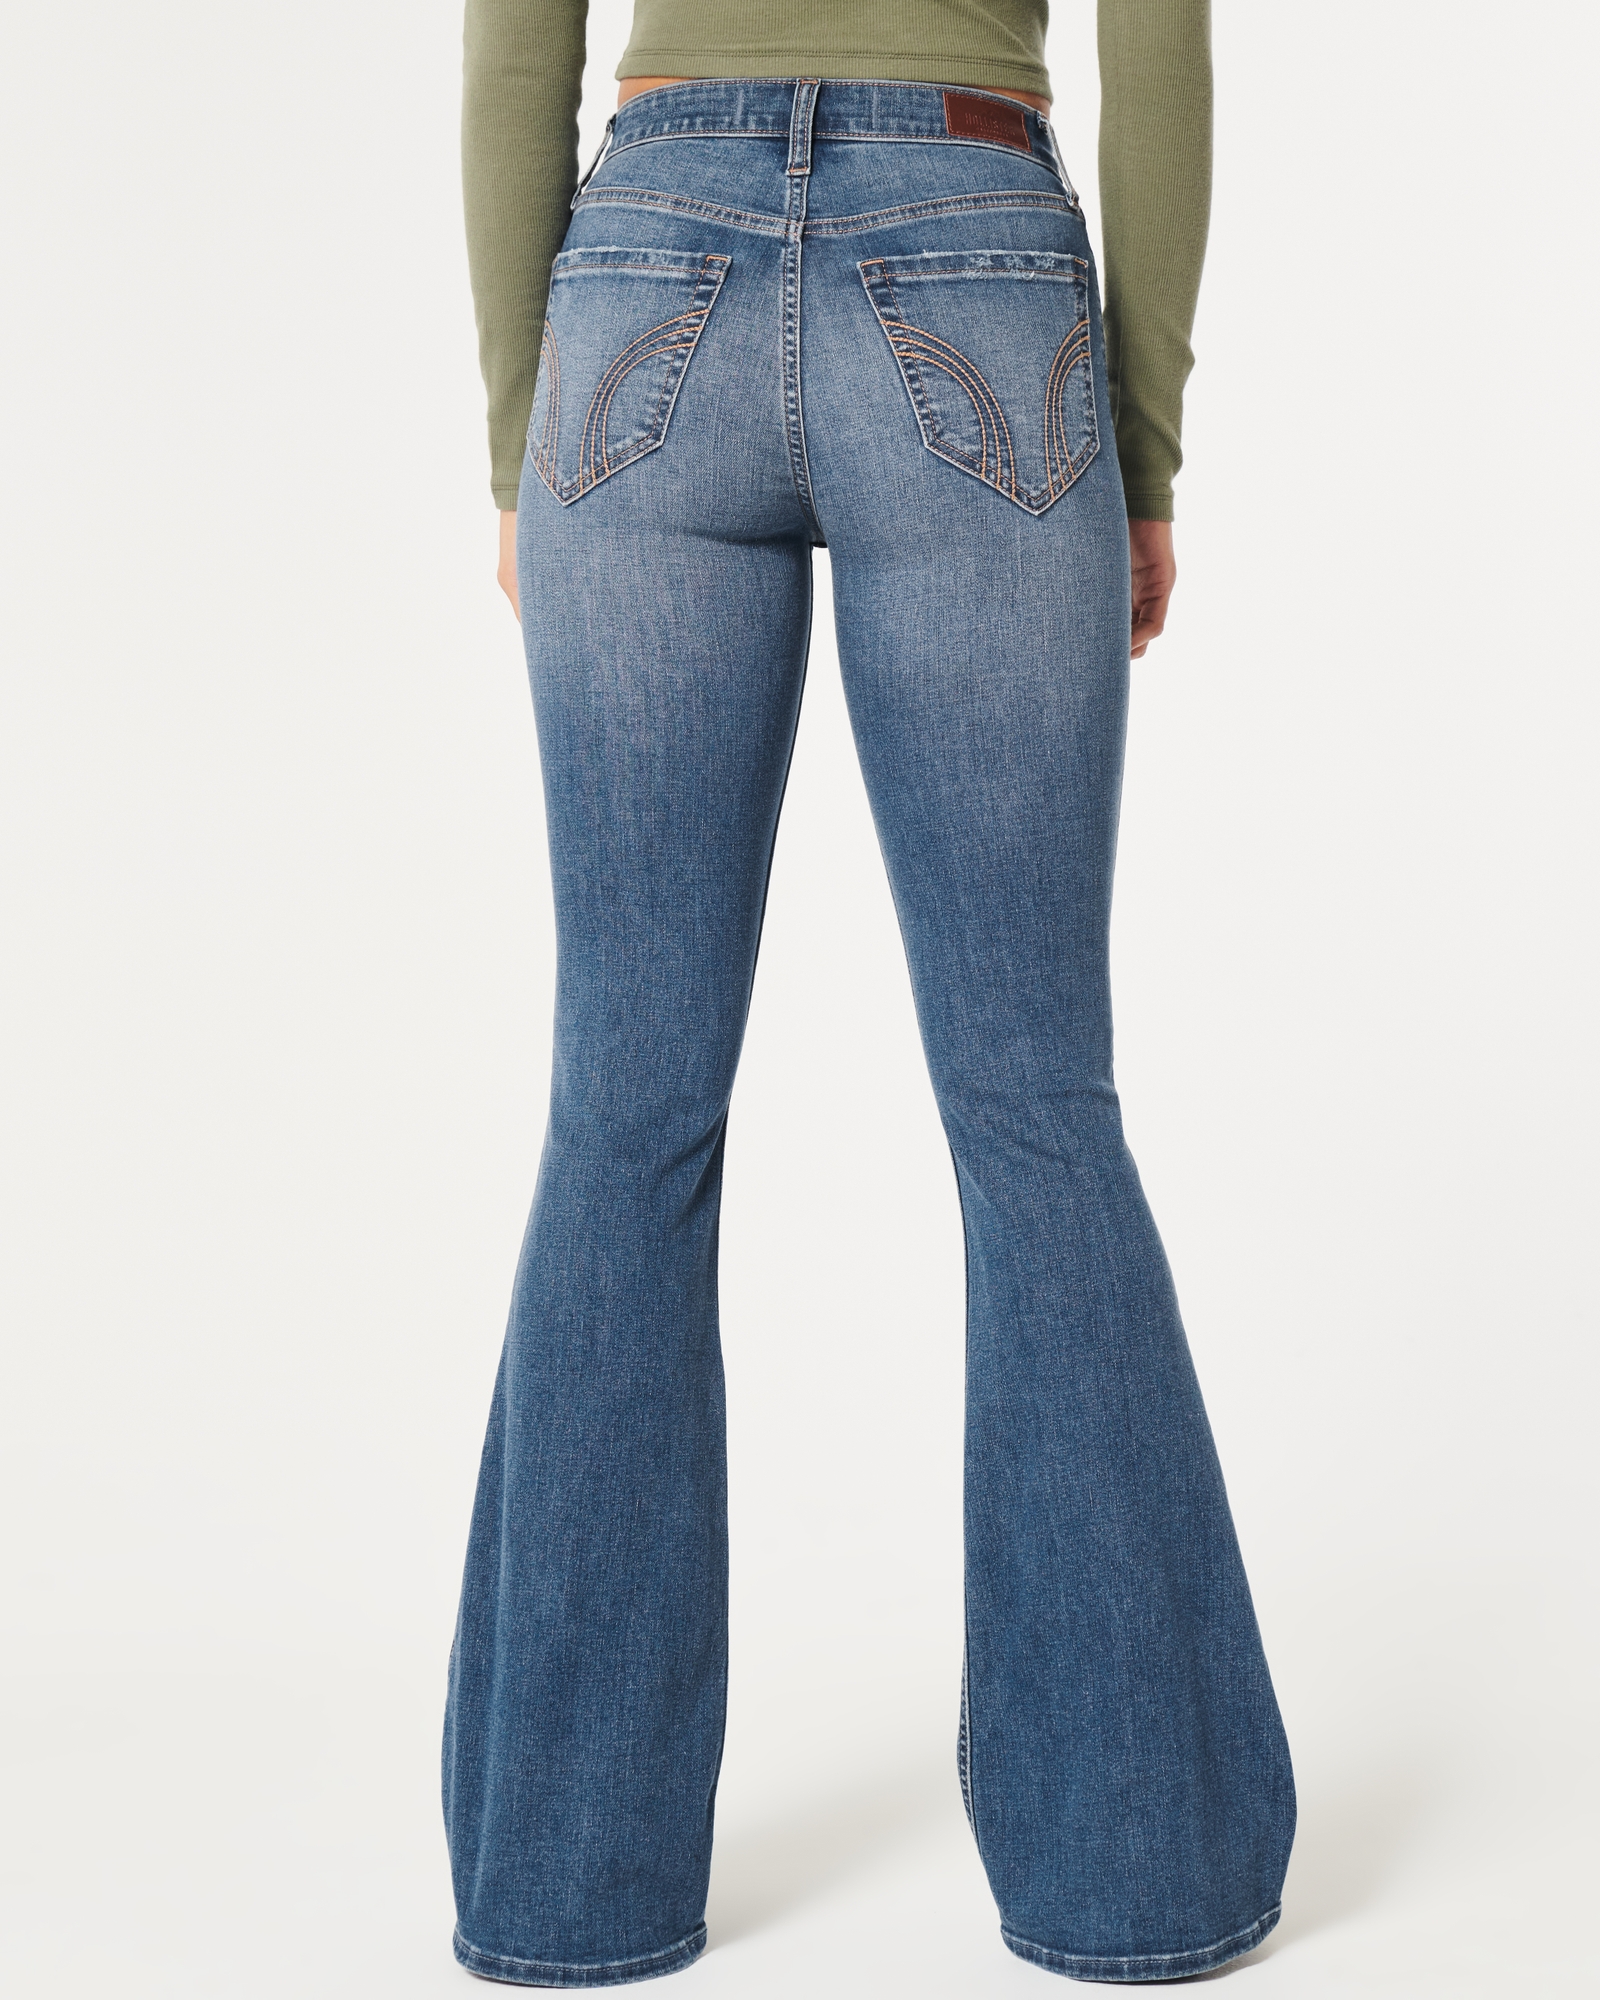 Hollister High Rise Flare Jeans Size 26 - $25 (50% Off Retail